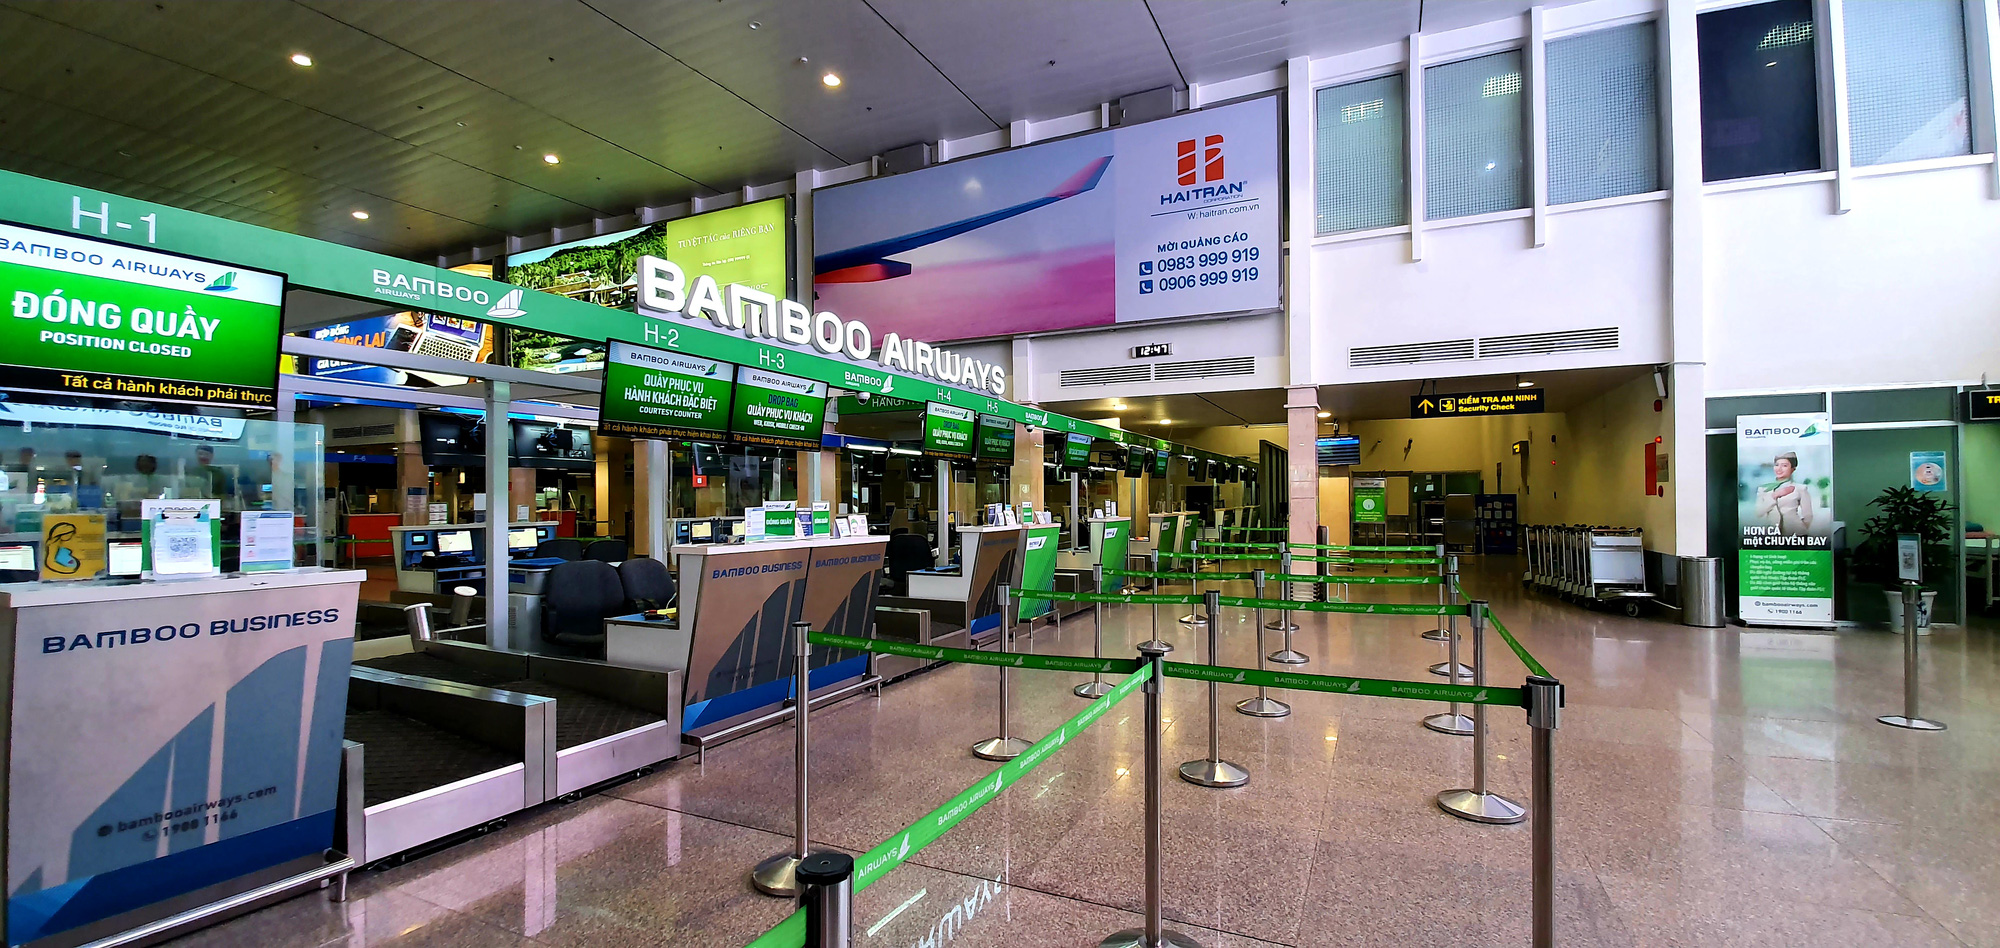 Empty Bamboo Airways check-in counters at Tan Son Nhat International Airport in Ho Chi Minh City, July 1, 2021. Photo: C. Trung / Tuoi Tre